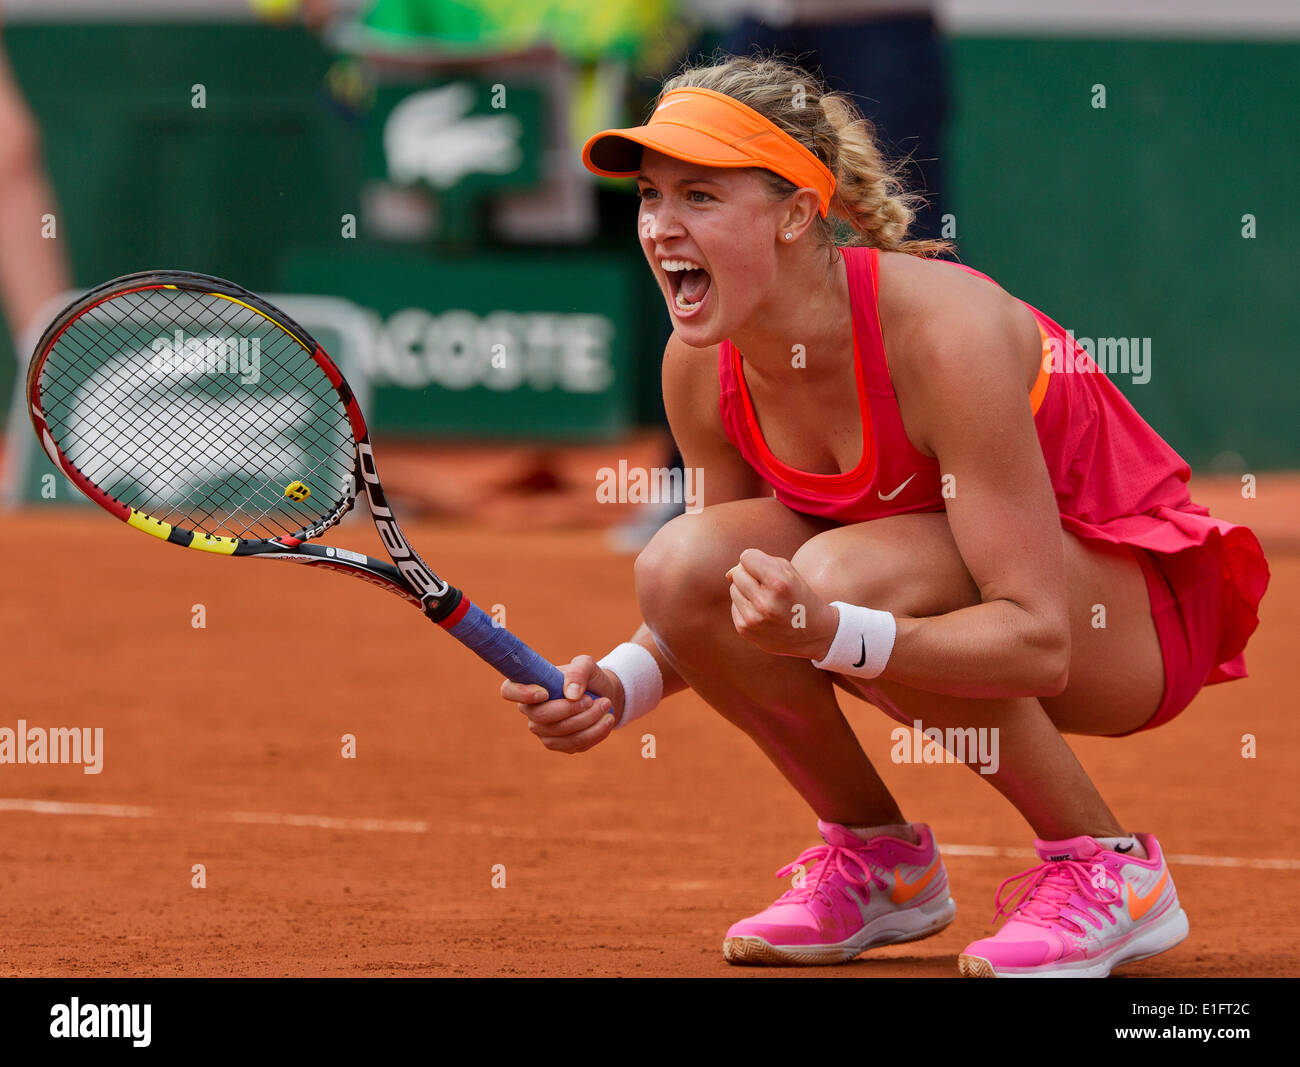 Paris, France. 03rd June, 2014. Tennis, French Open, Roland Garros, Eugenie  Bouchard (CAN) goes in celebration after defeating Suarez Navaro (ESP)  Credit: Henk Koster/Alamy Live News Stock Photo - Alamy